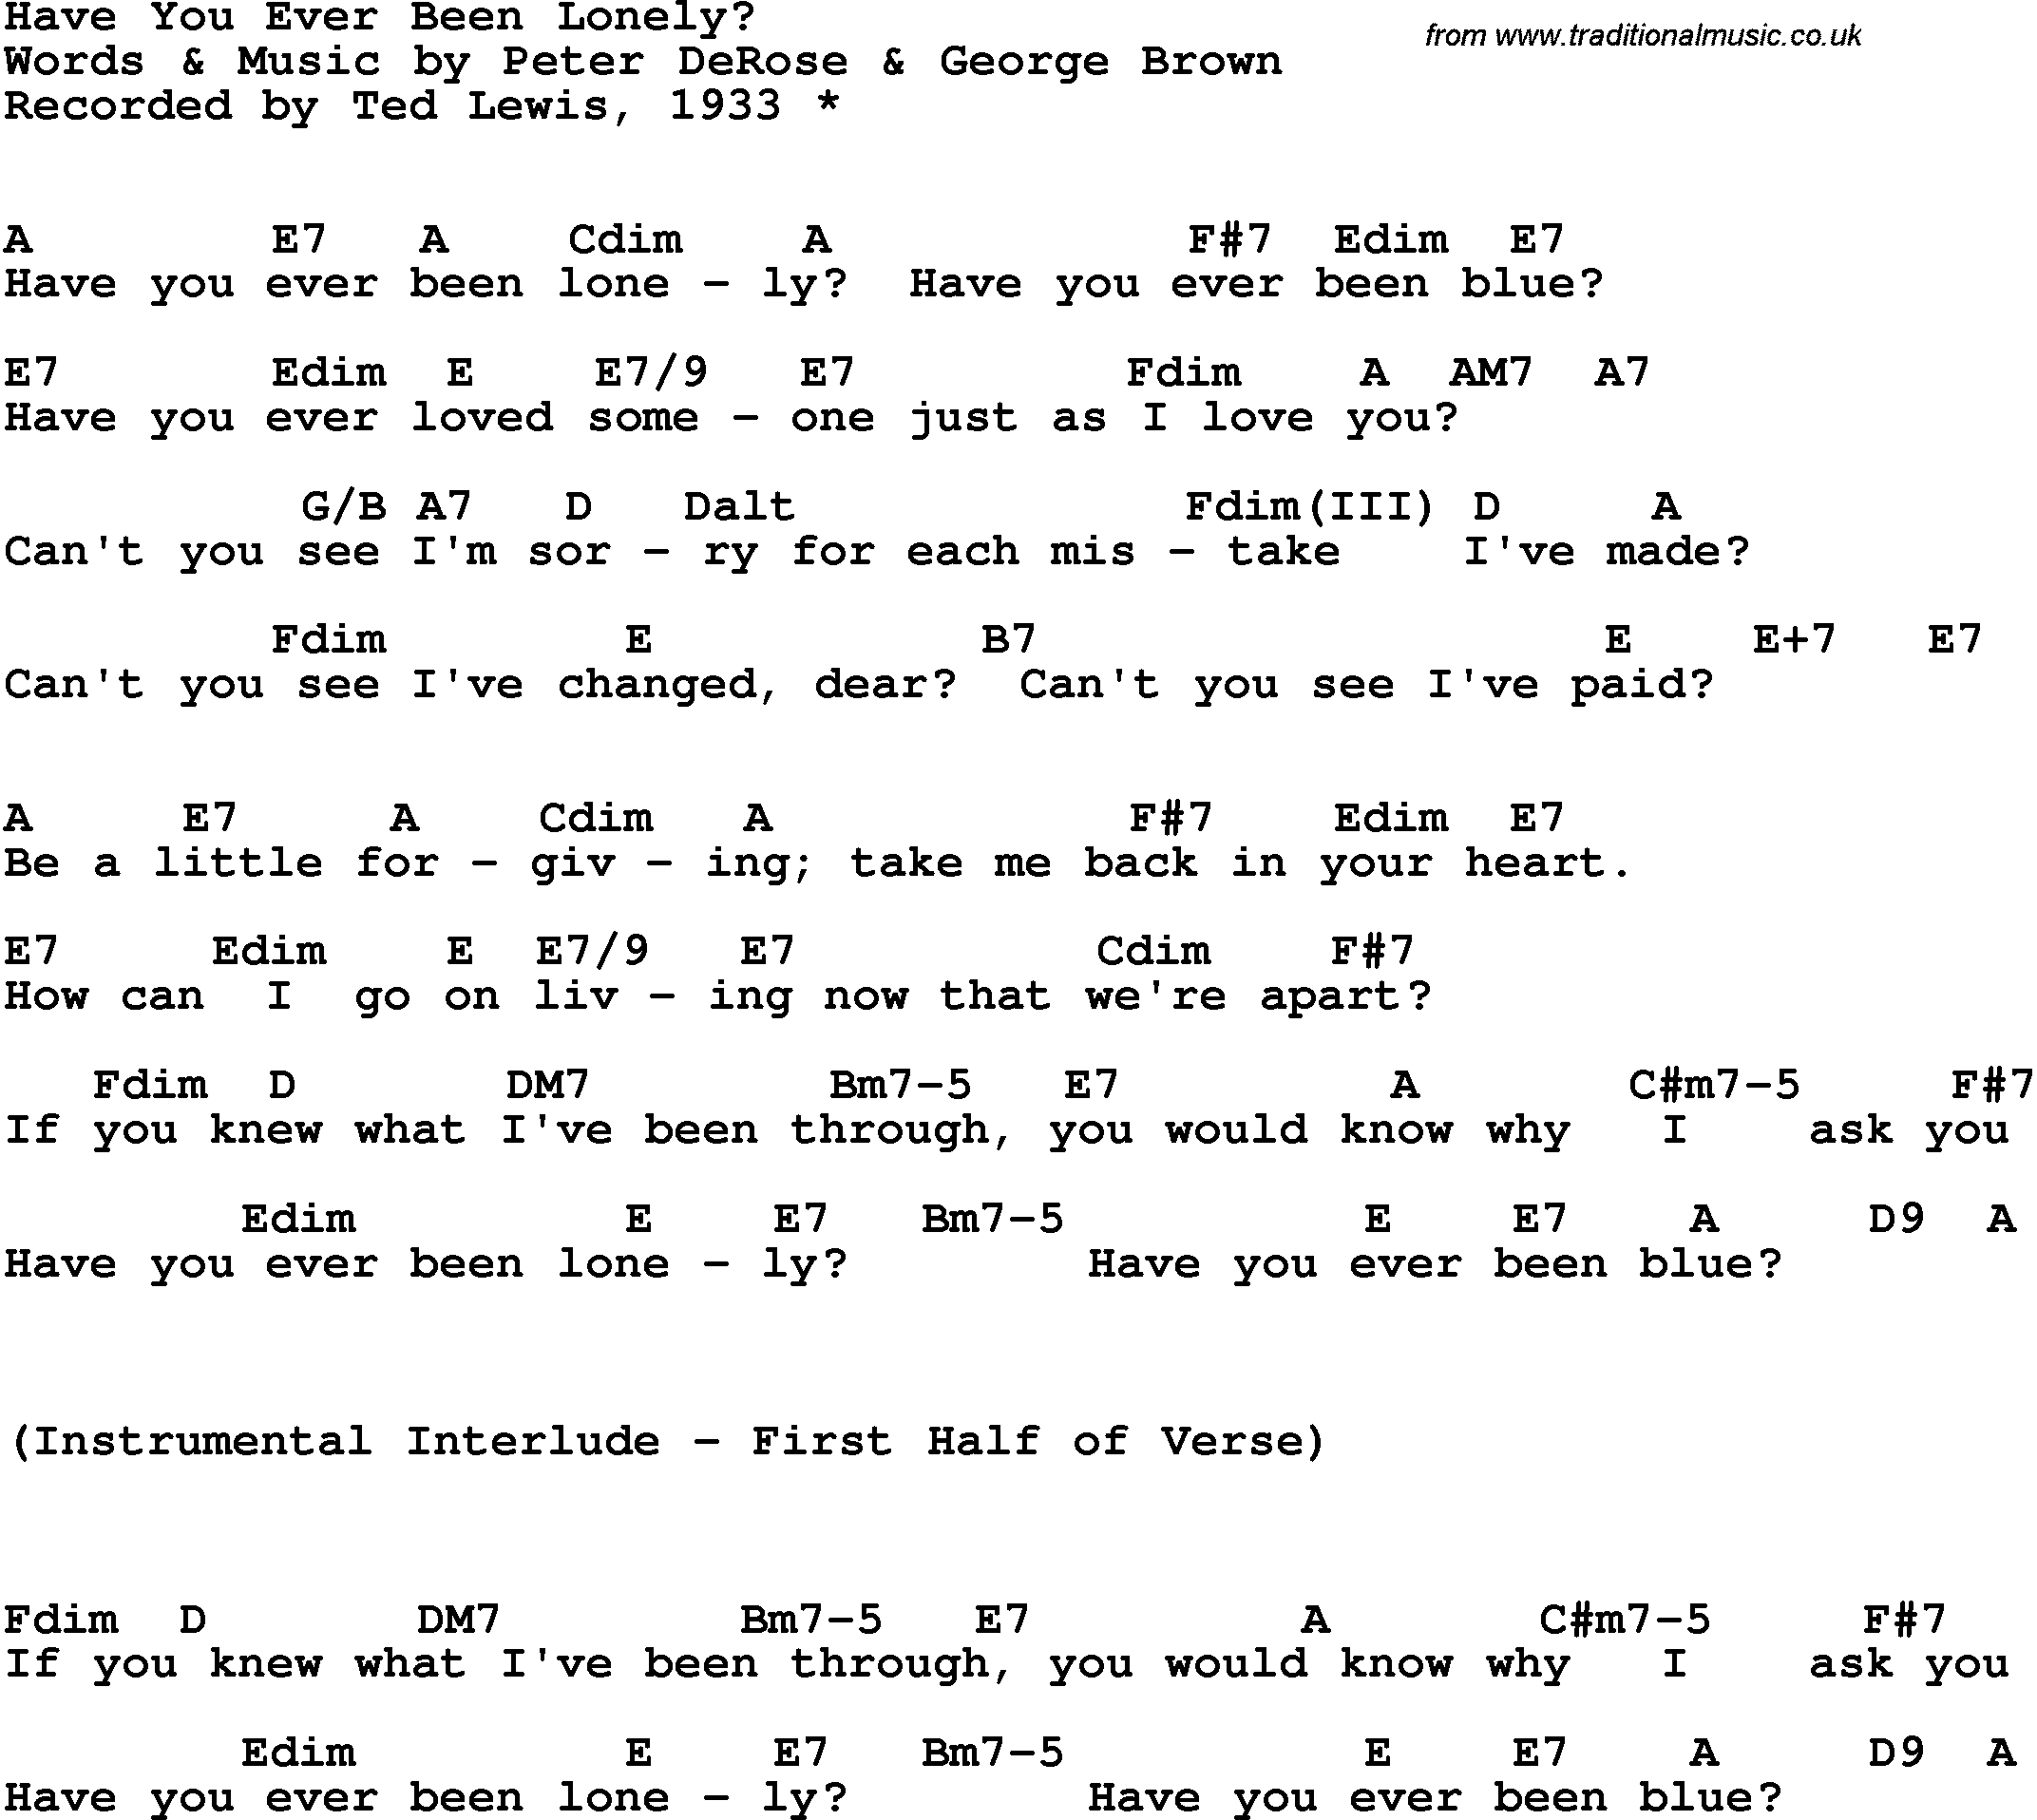 Song Lyrics with guitar chords for Have You Ever Been Lonely - Ted Lewis, 1933